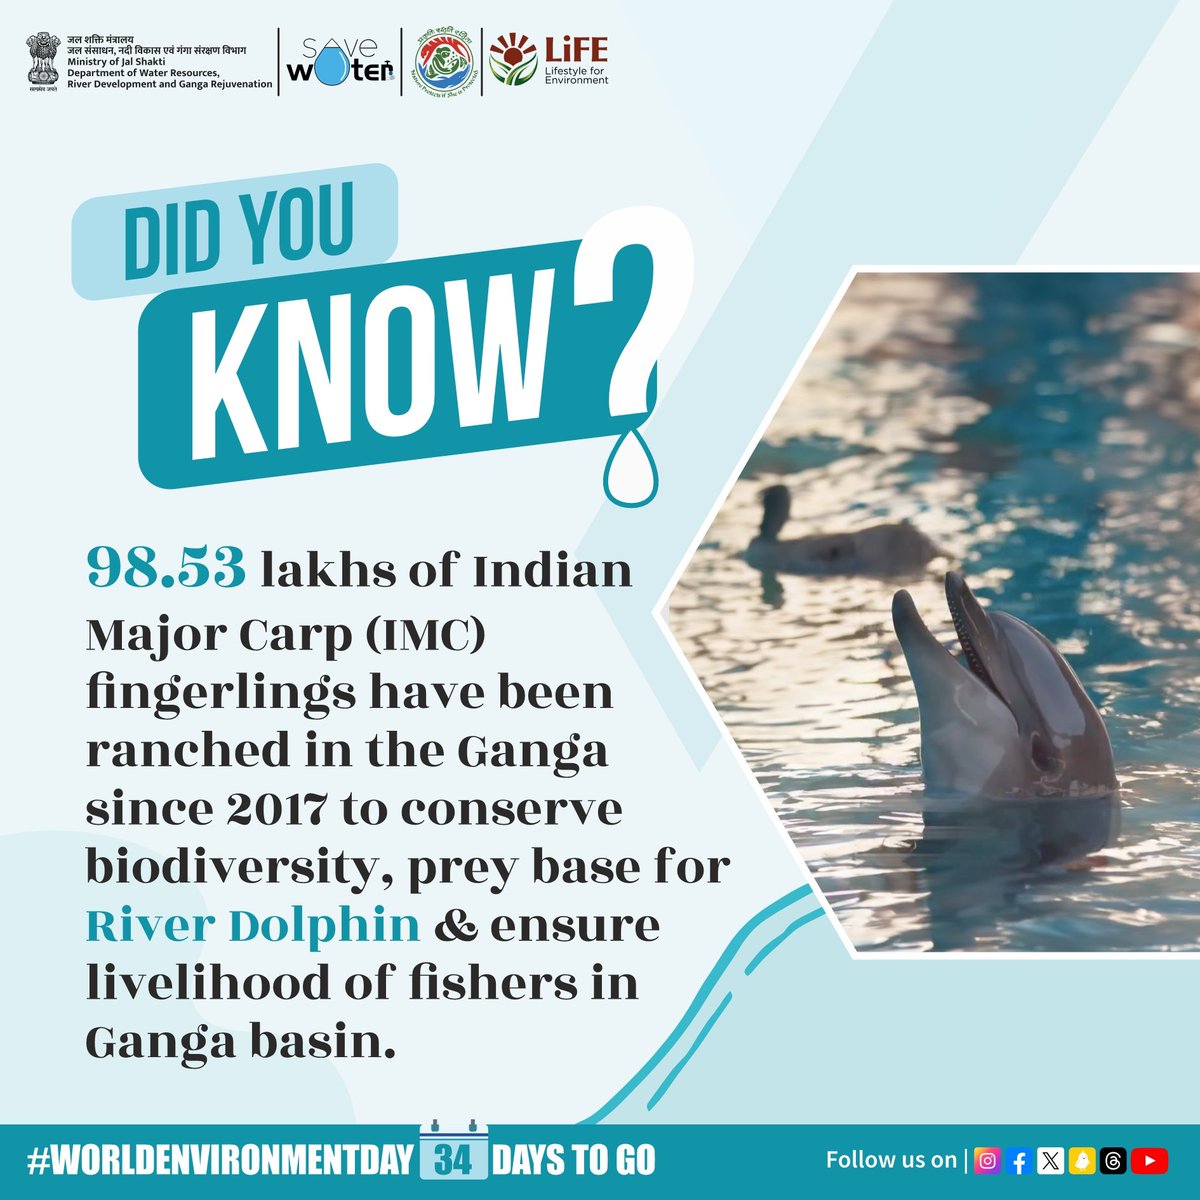 #NamamiGange celebrates the Gangetic Dolphin's comeback! Their increasing numbers are a win for conservation. These 'river tigers' support fisher livelihoods by maintaining fish populations and serve as crucial bio-indicators of #NationalRiver #Ganga's health! #DidYouKnow